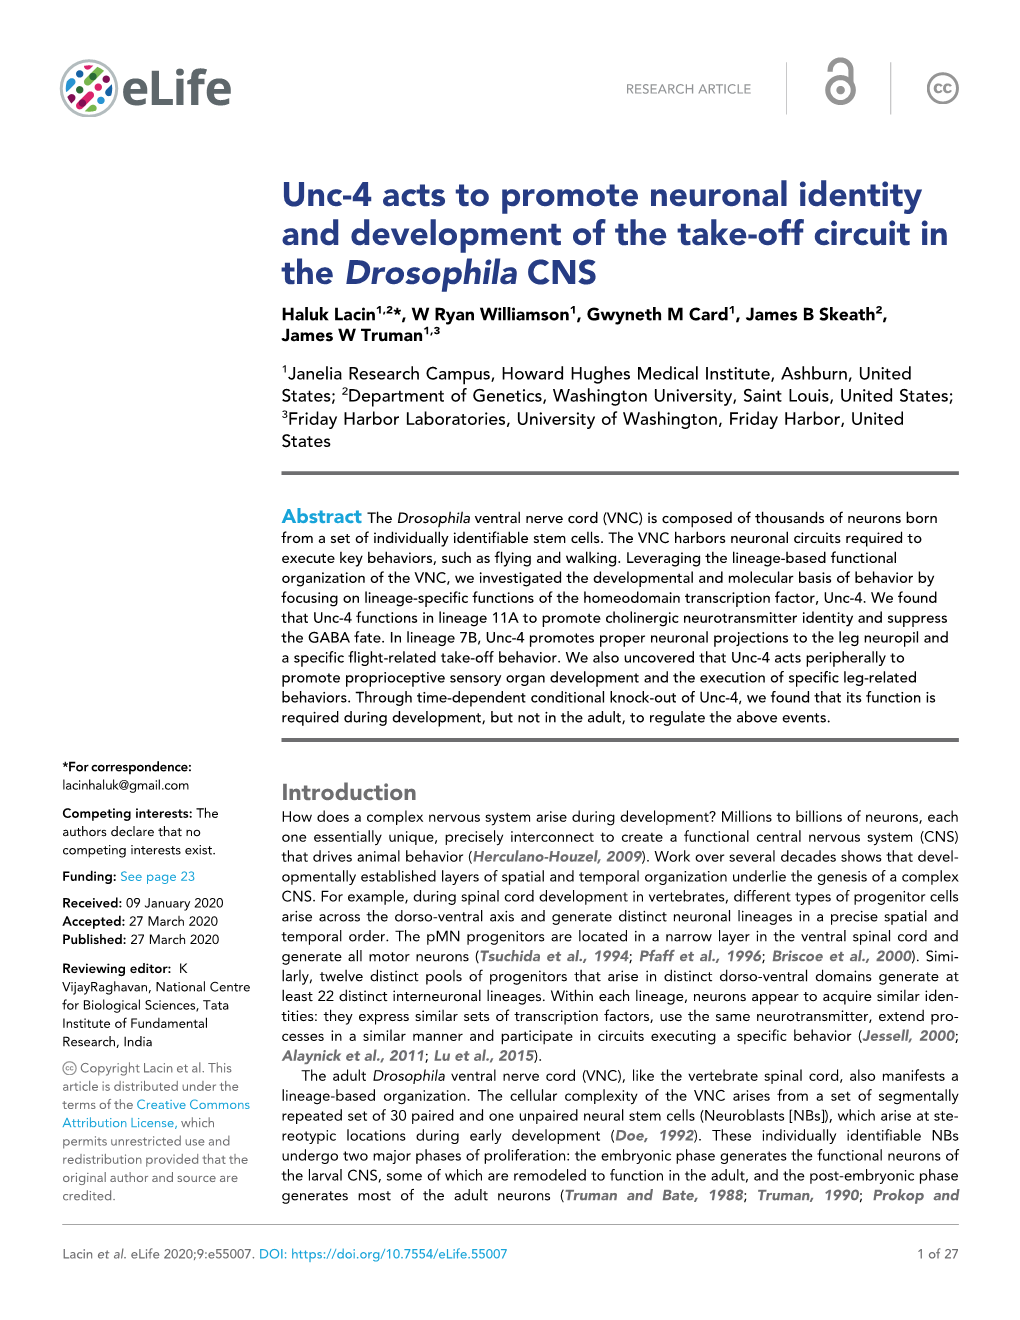 Unc-4 Acts to Promote Neuronal Identity and Development of The